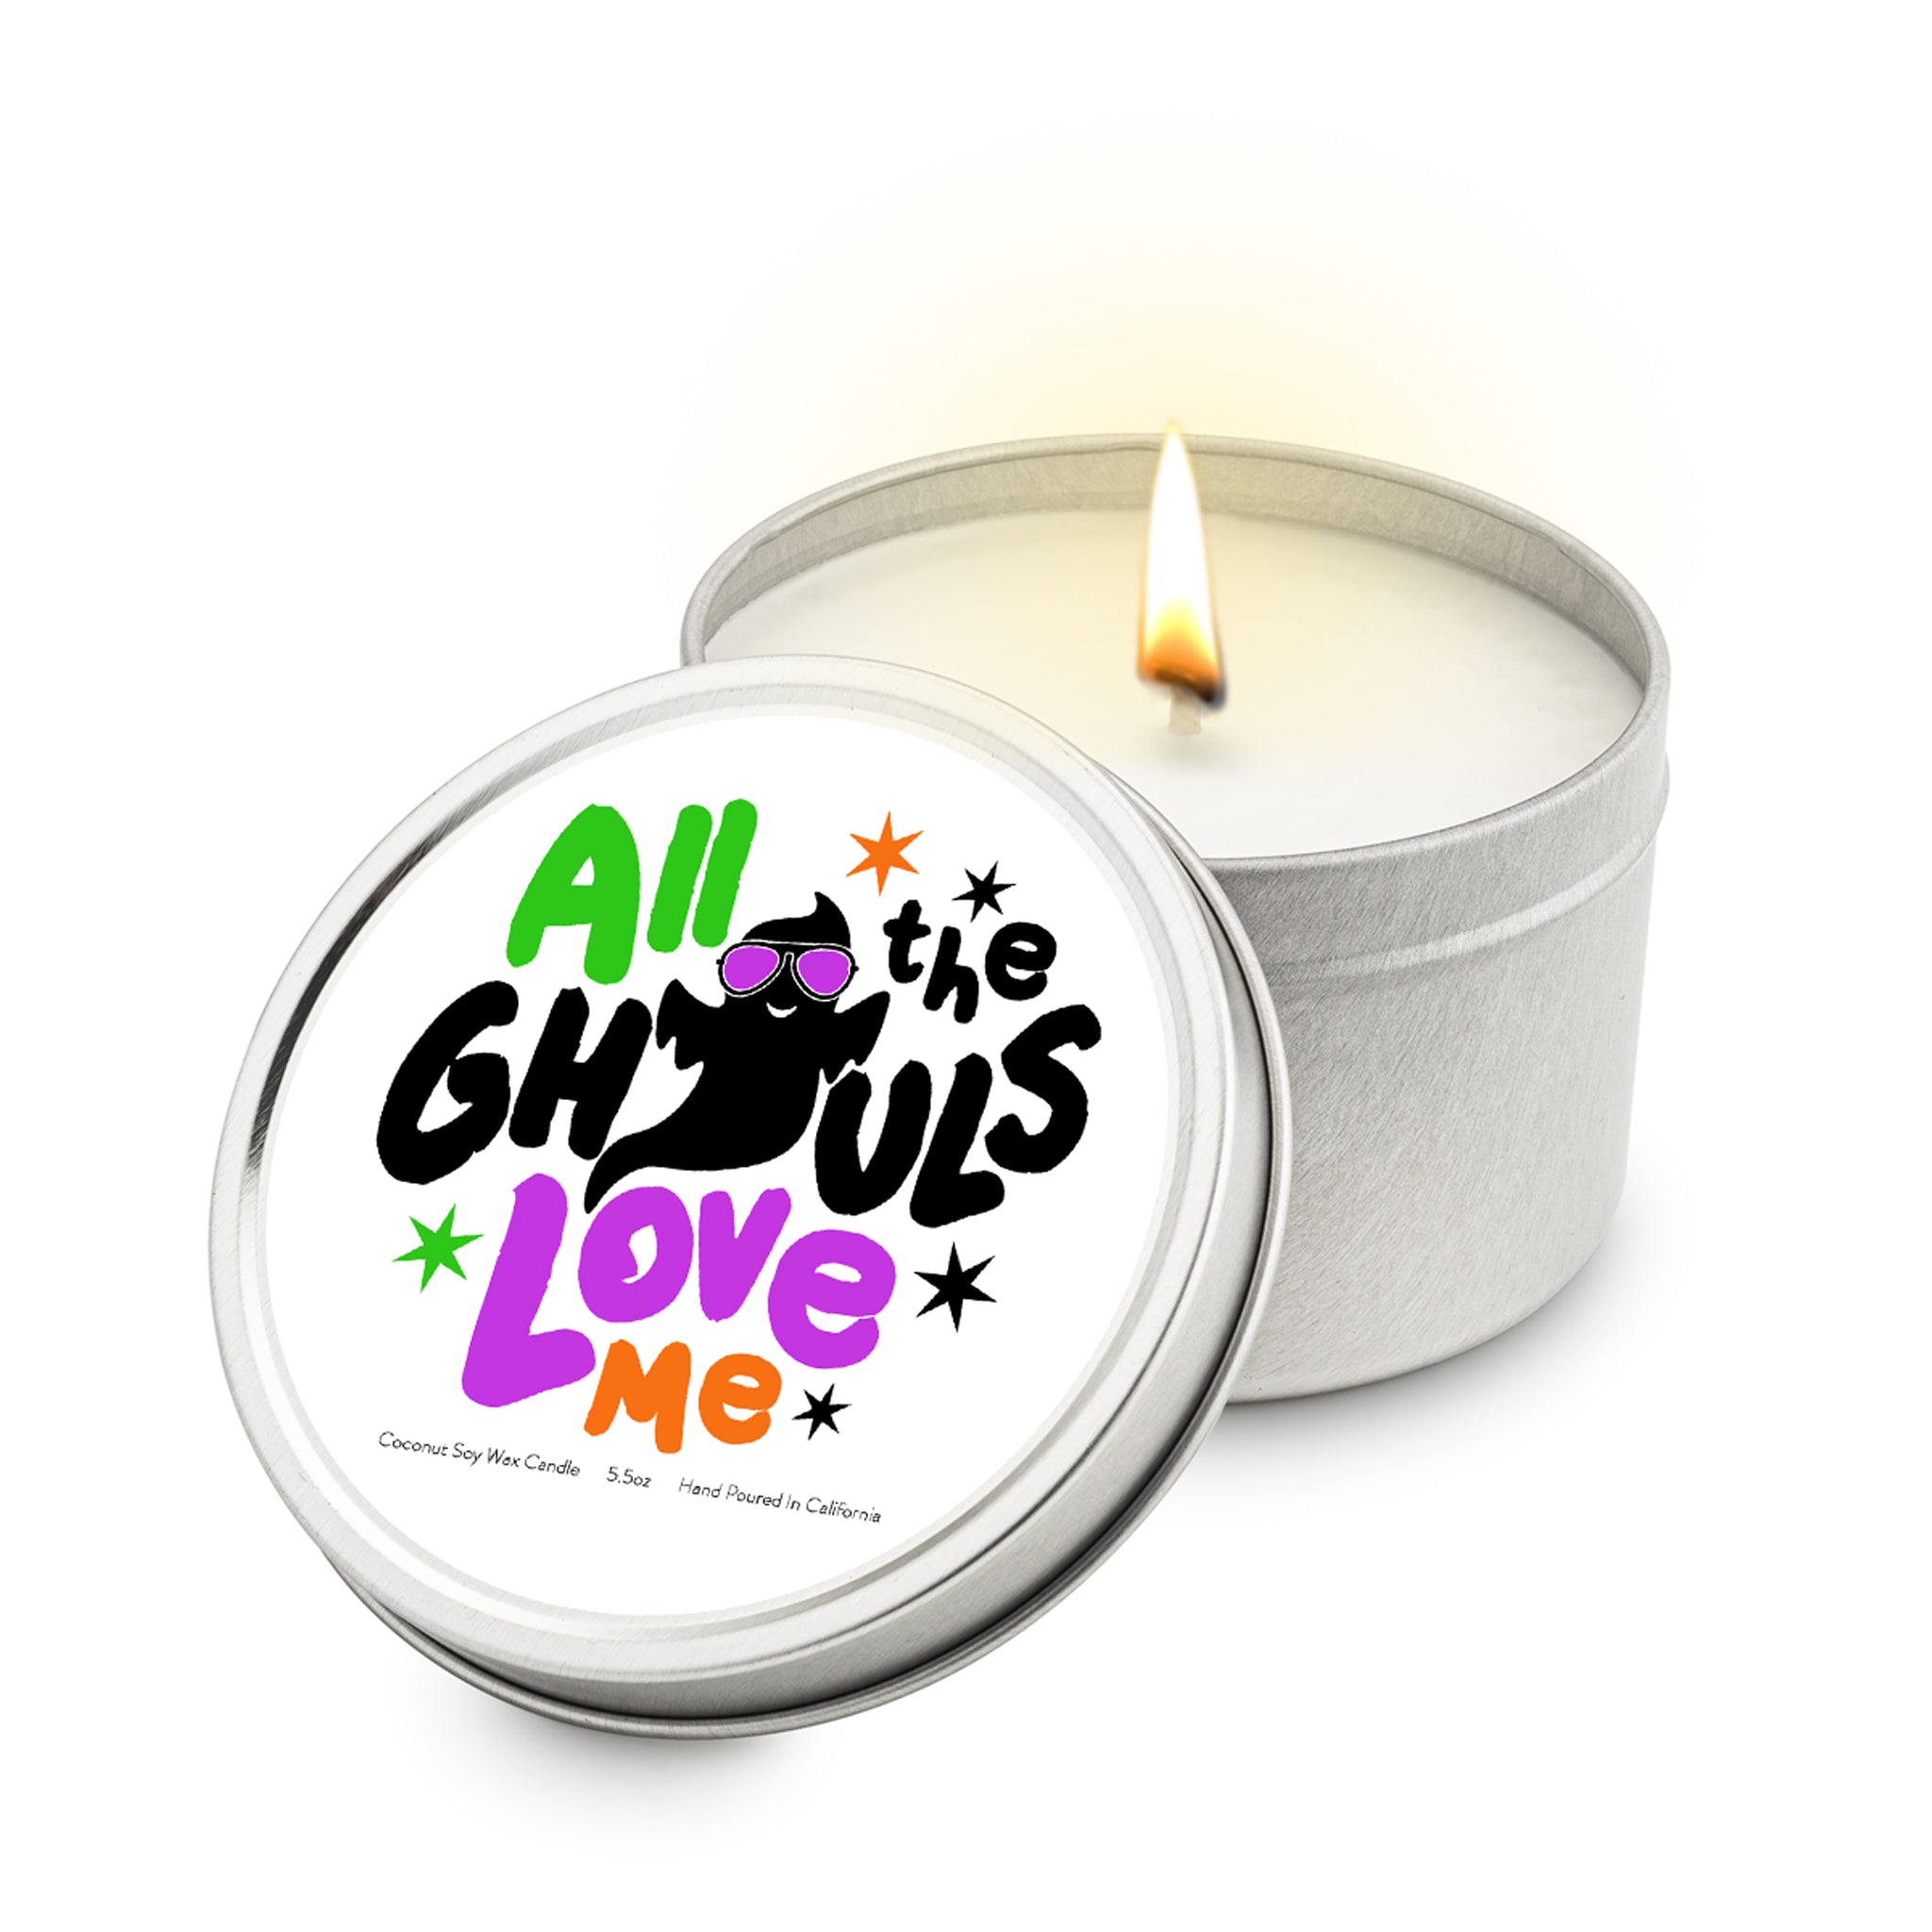 All The Ghouls Love Me 5.5 oz Soy Blend Travel Candle Tin